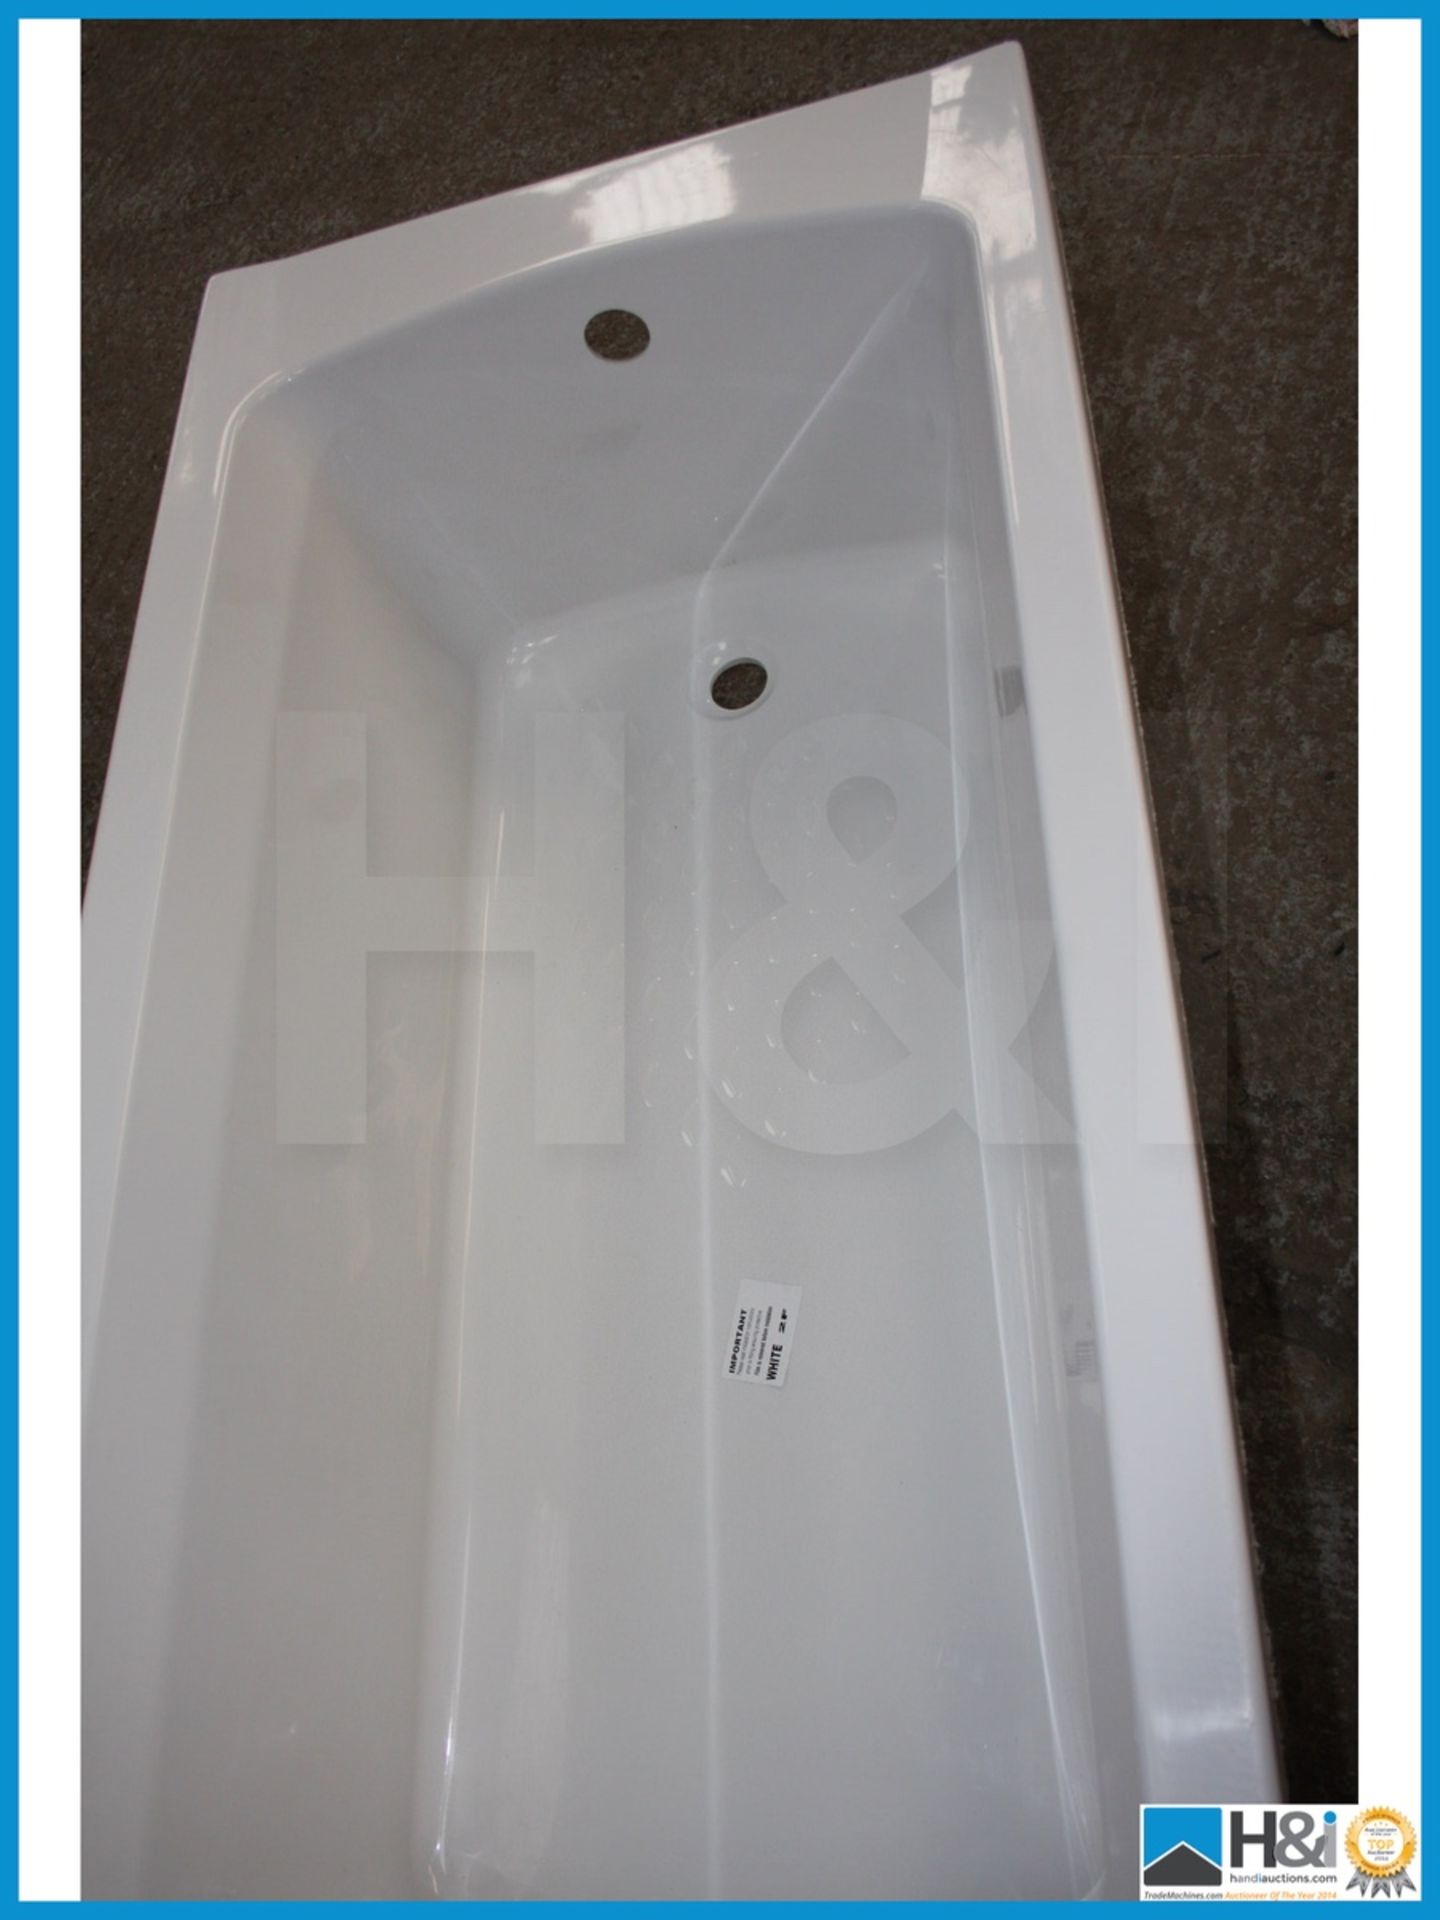 Jacuzzi elatus 1500 x 685 2 tap hole chrome grips new boxed rrp œ899 Appraisal: Viewing Essential - Image 5 of 5